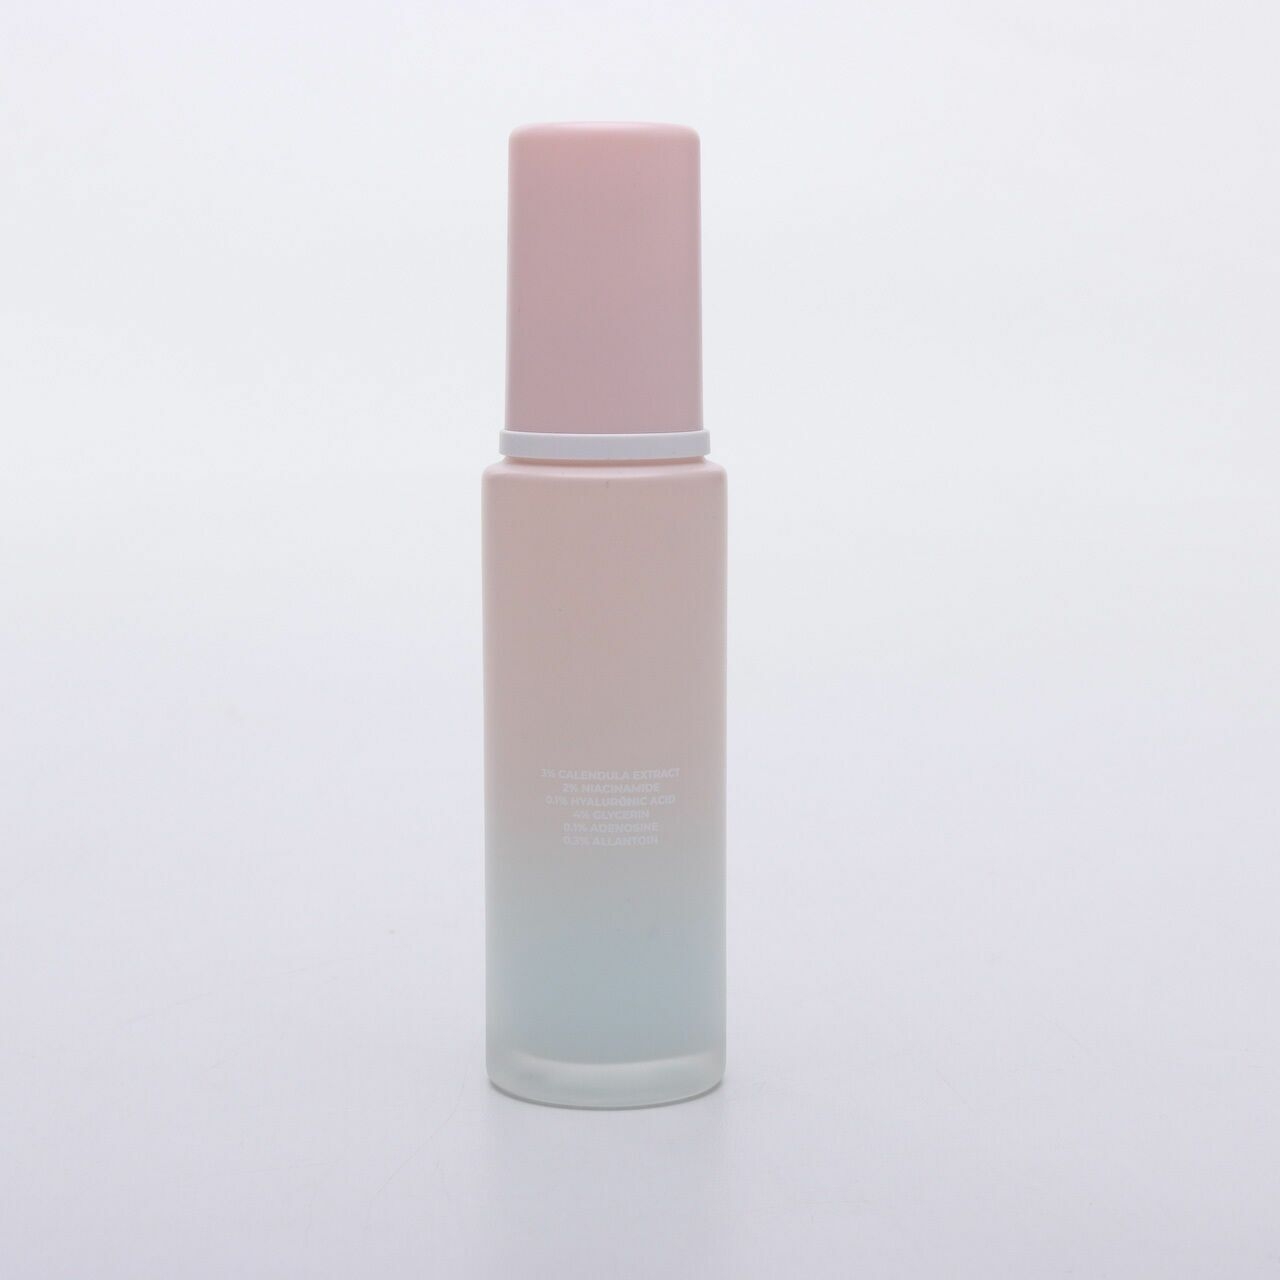 Rose All Day Skin By Rose 24-Hour Hydro Surge Moisturizer